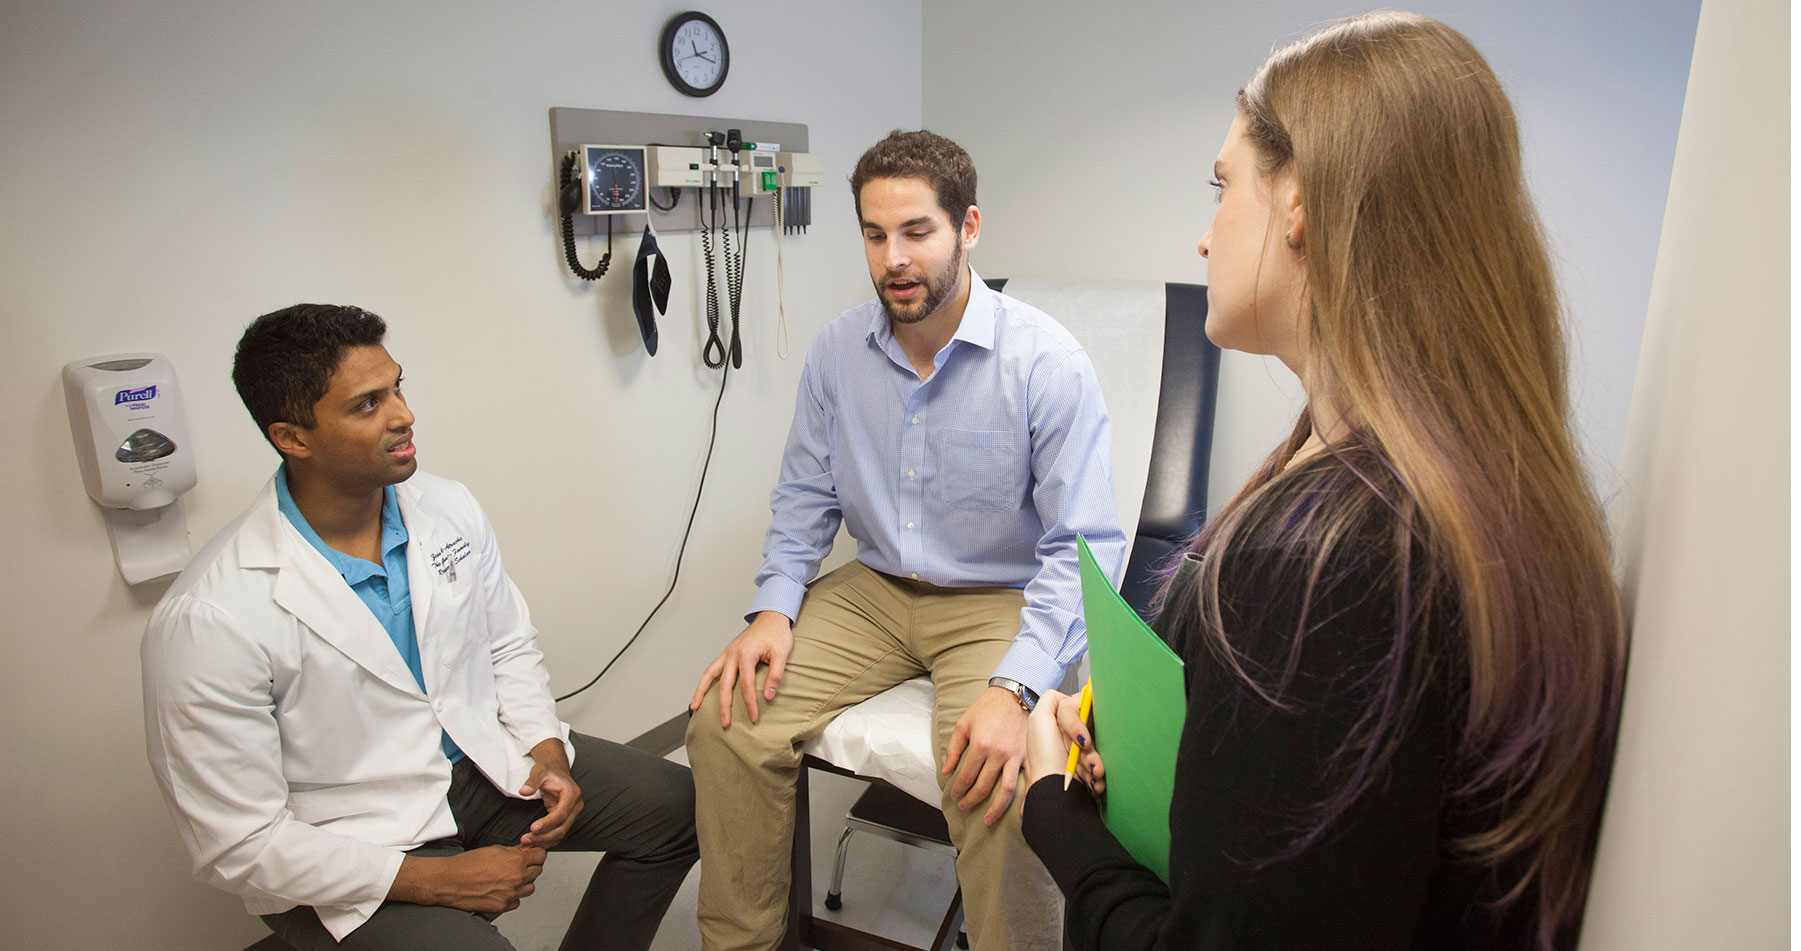 A PCOM medical student and psychology student speak with a patient actor in an exam room.